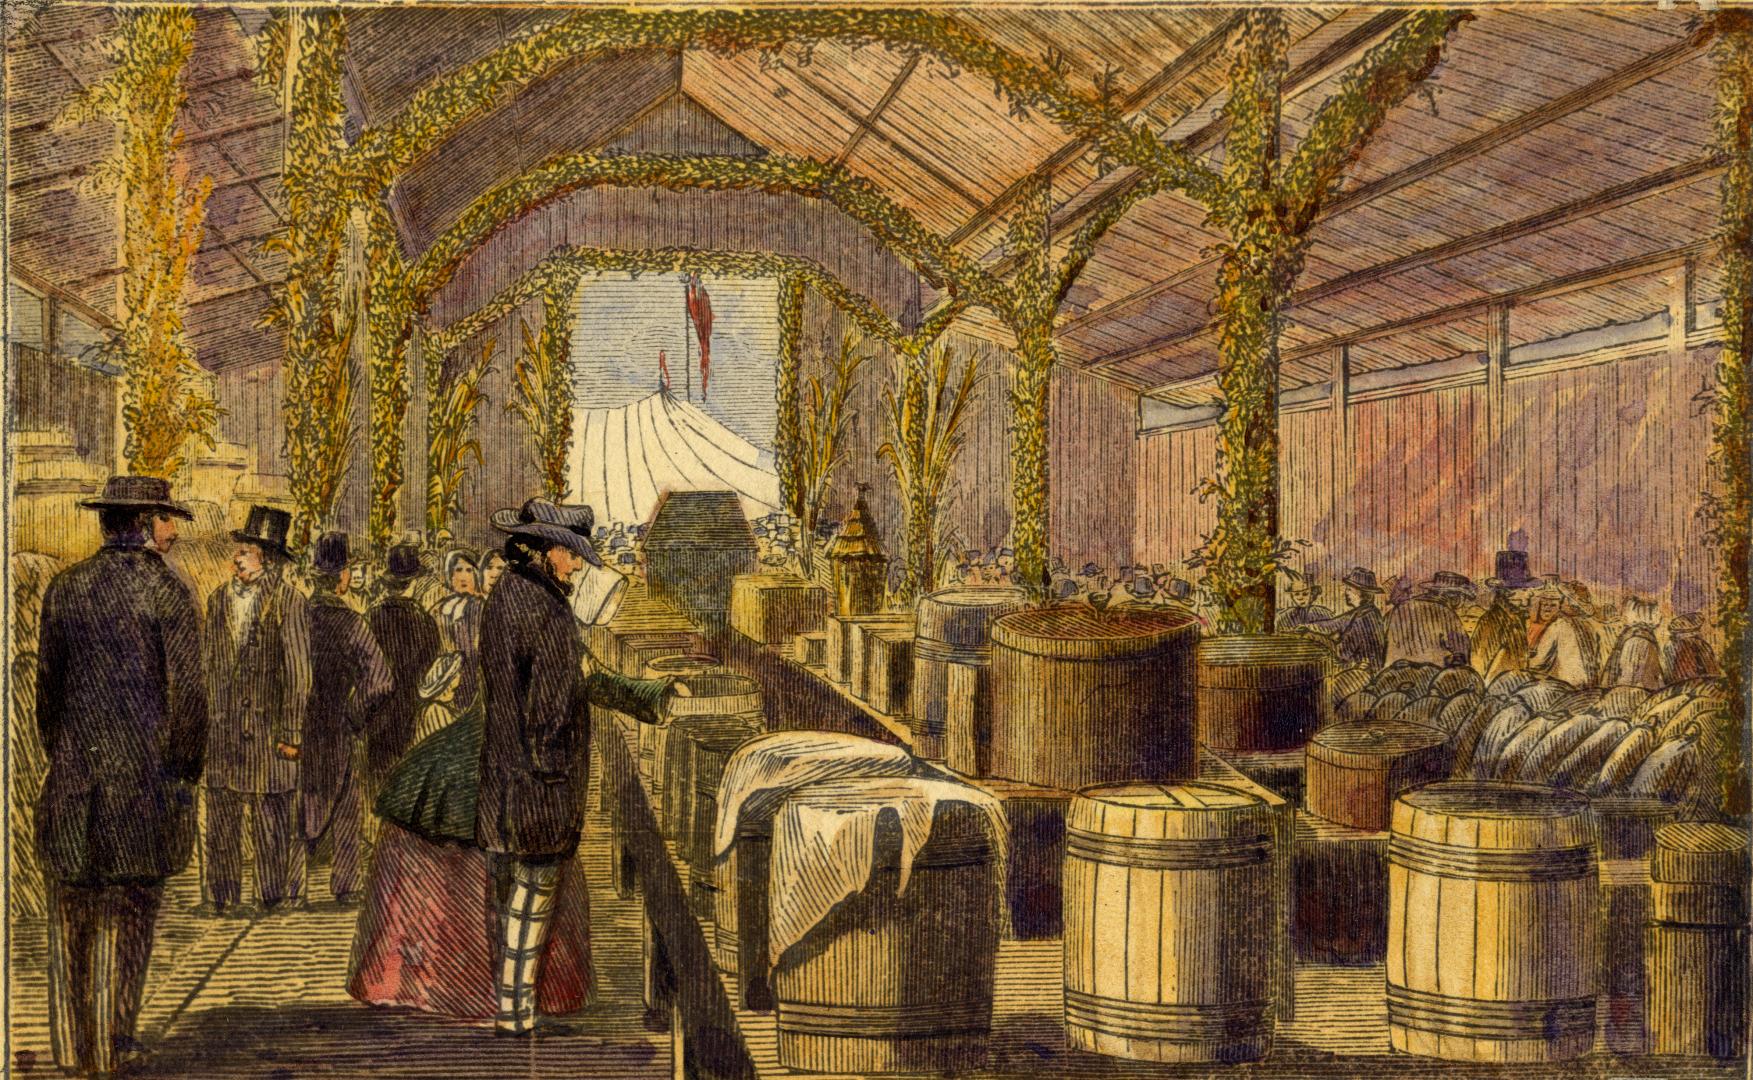 Provincial Exhibition (1852), University Avenue, west side, between (approx